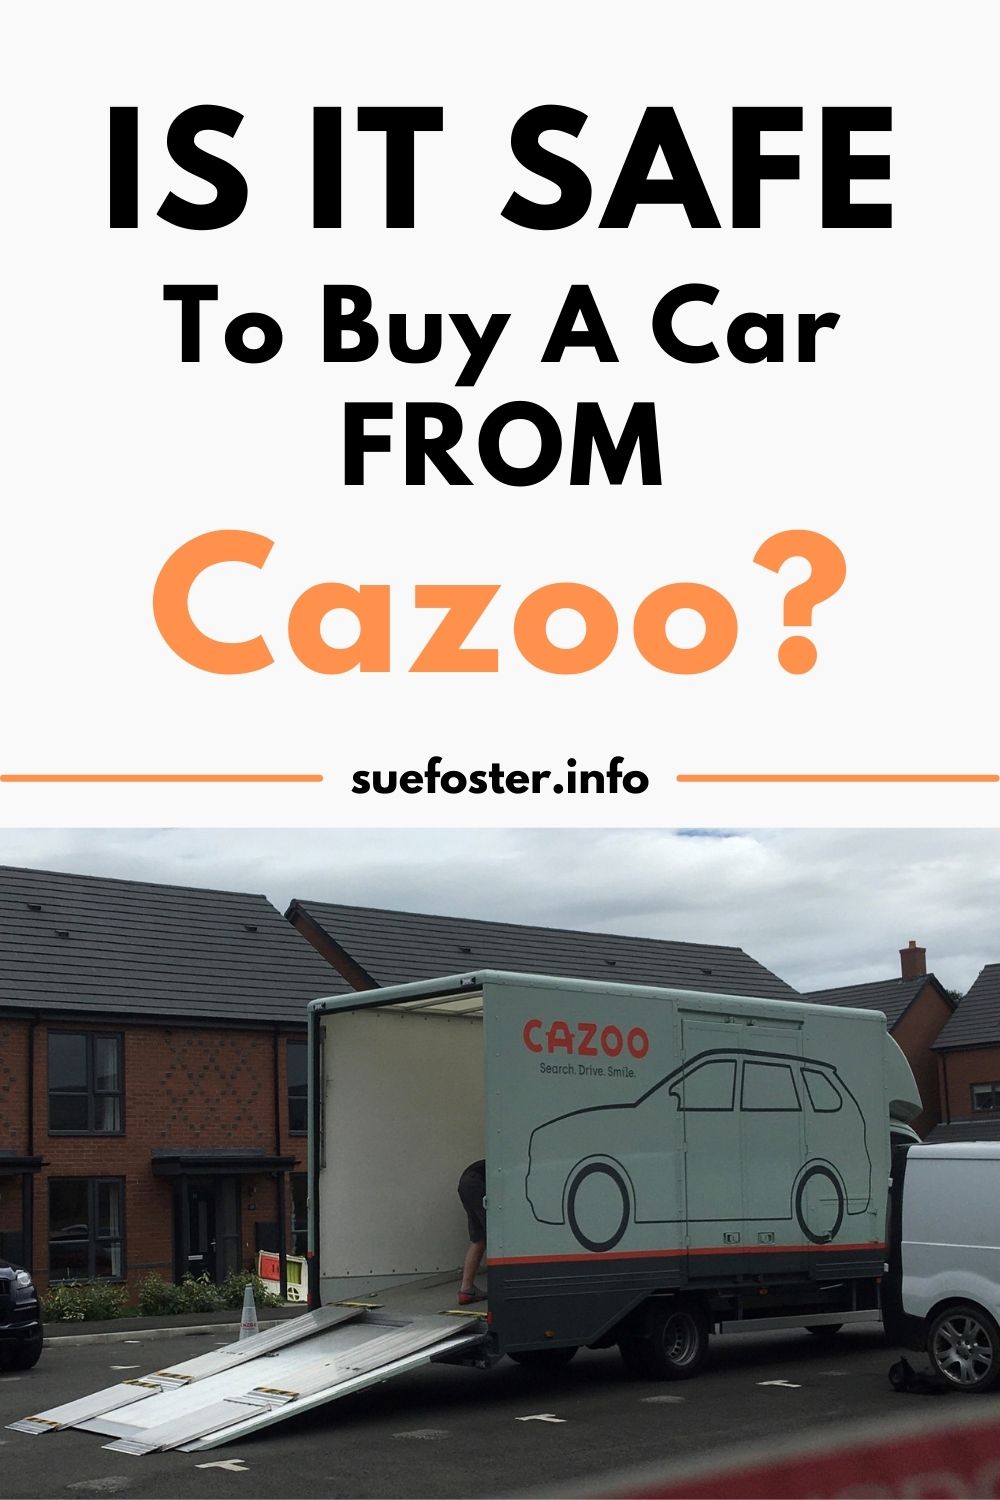 Is-it-safe-to-buy-a-car-from-Cazoo